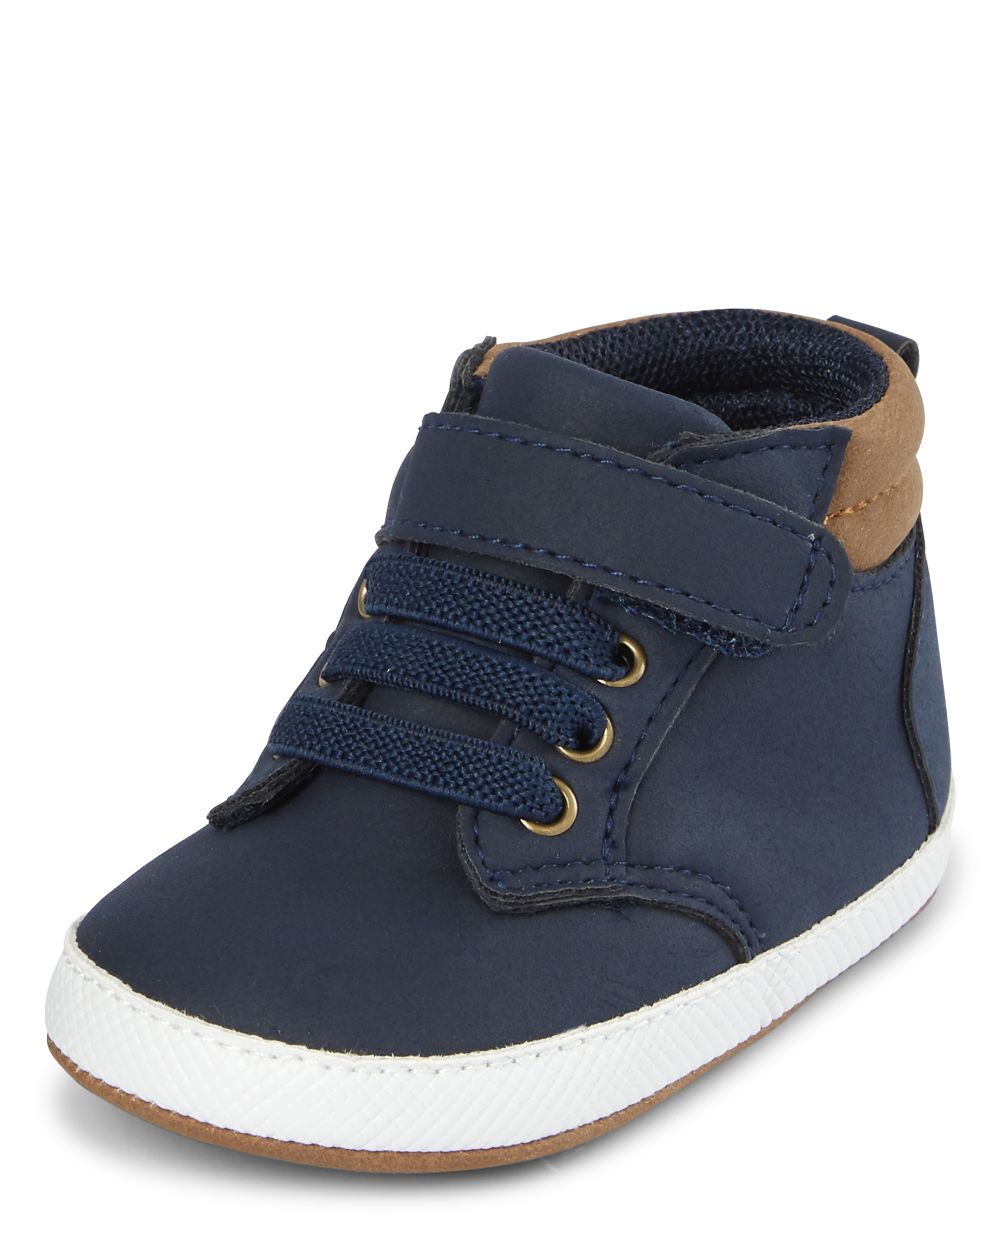 

Newborn Baby Boys Hi Top Sneakers - Blue - The Children's Place